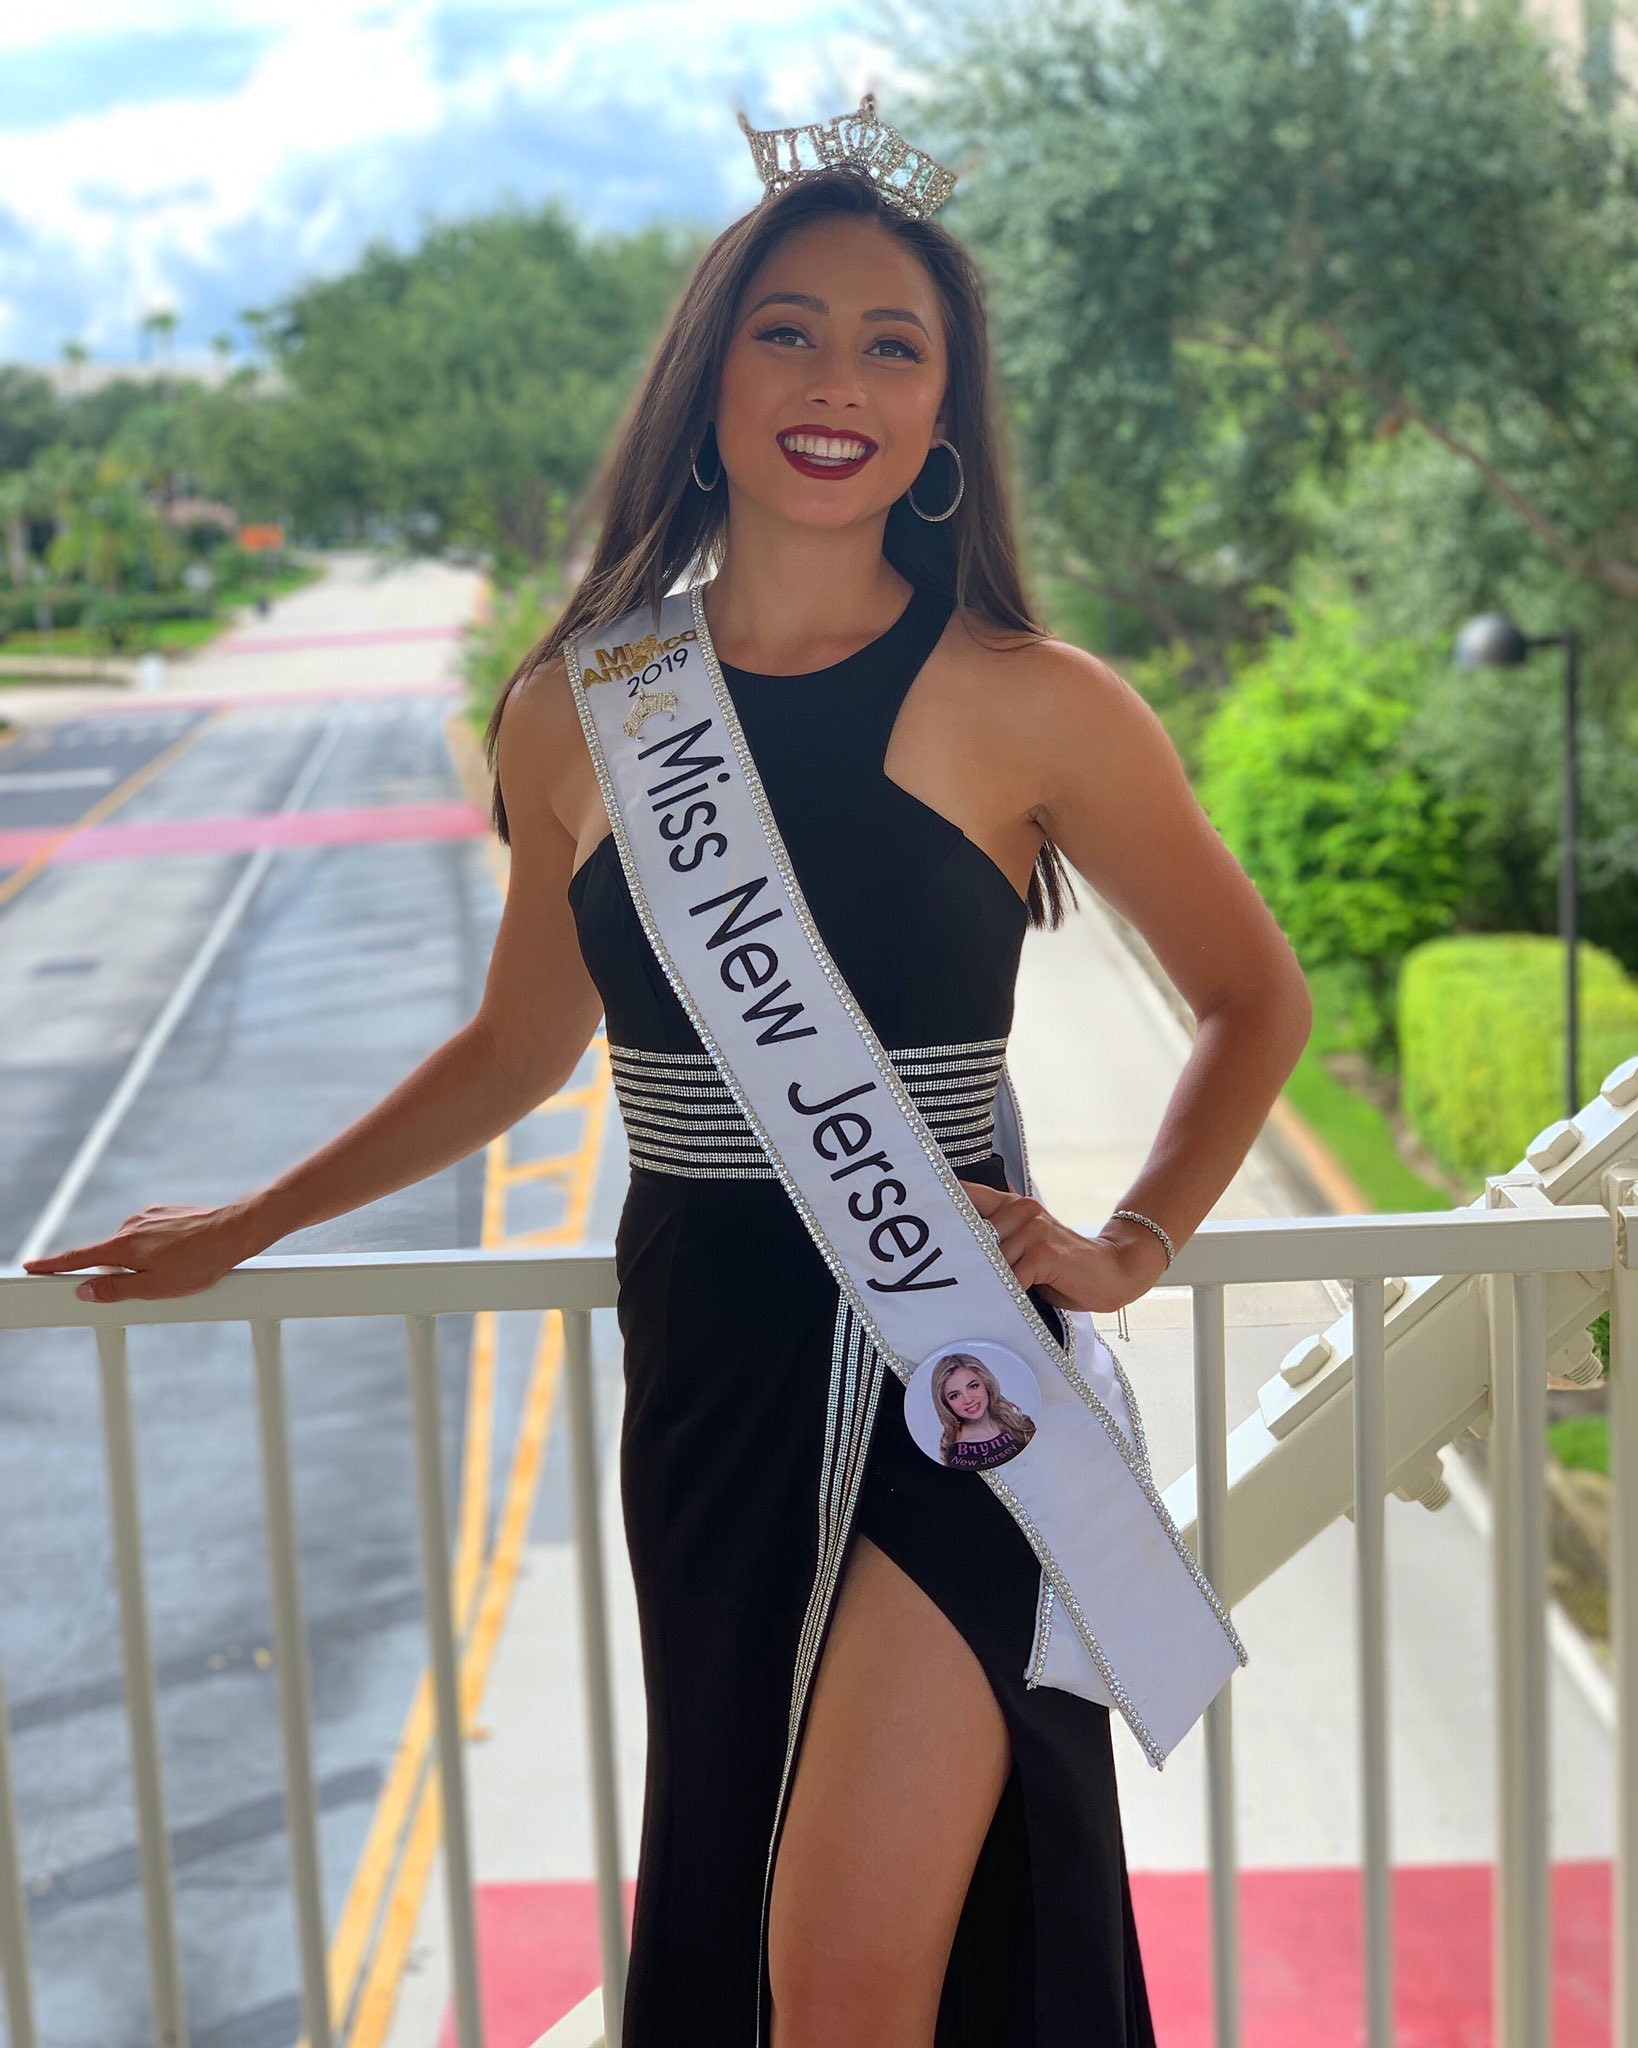 Miss New Jersey on Twitter: "✨ Jade Glab, #MissNewJersey, is the big 2.0!  😉 #Punny #Humor #20YearsYoung Dress: @CocosChateau  https://t.co/q4CUZuFWnt" / Twitter